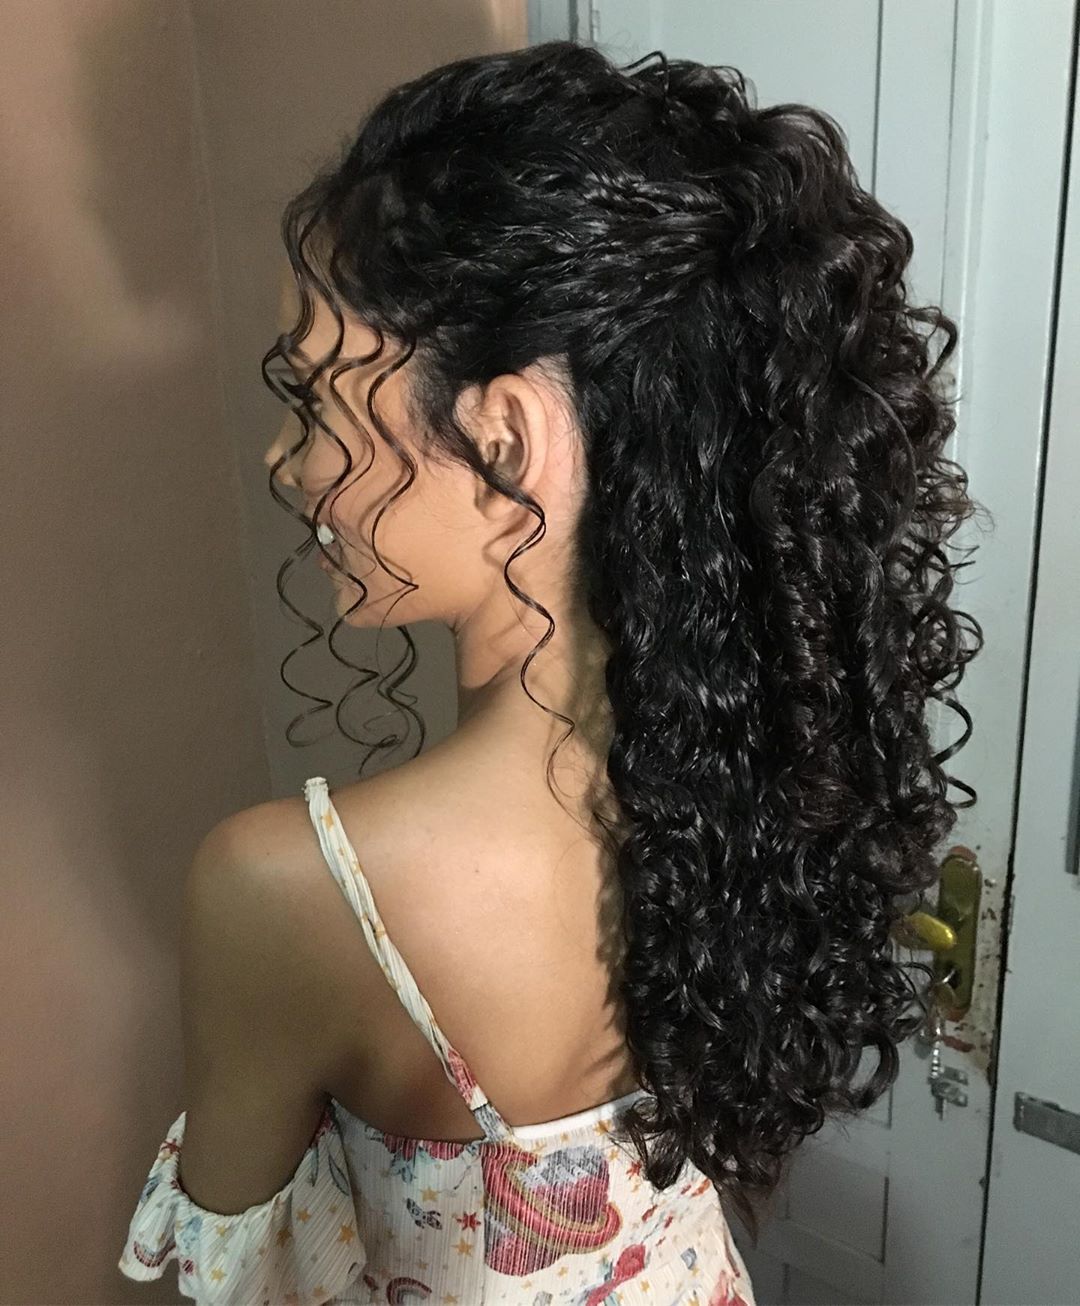 hairstyle curly hair